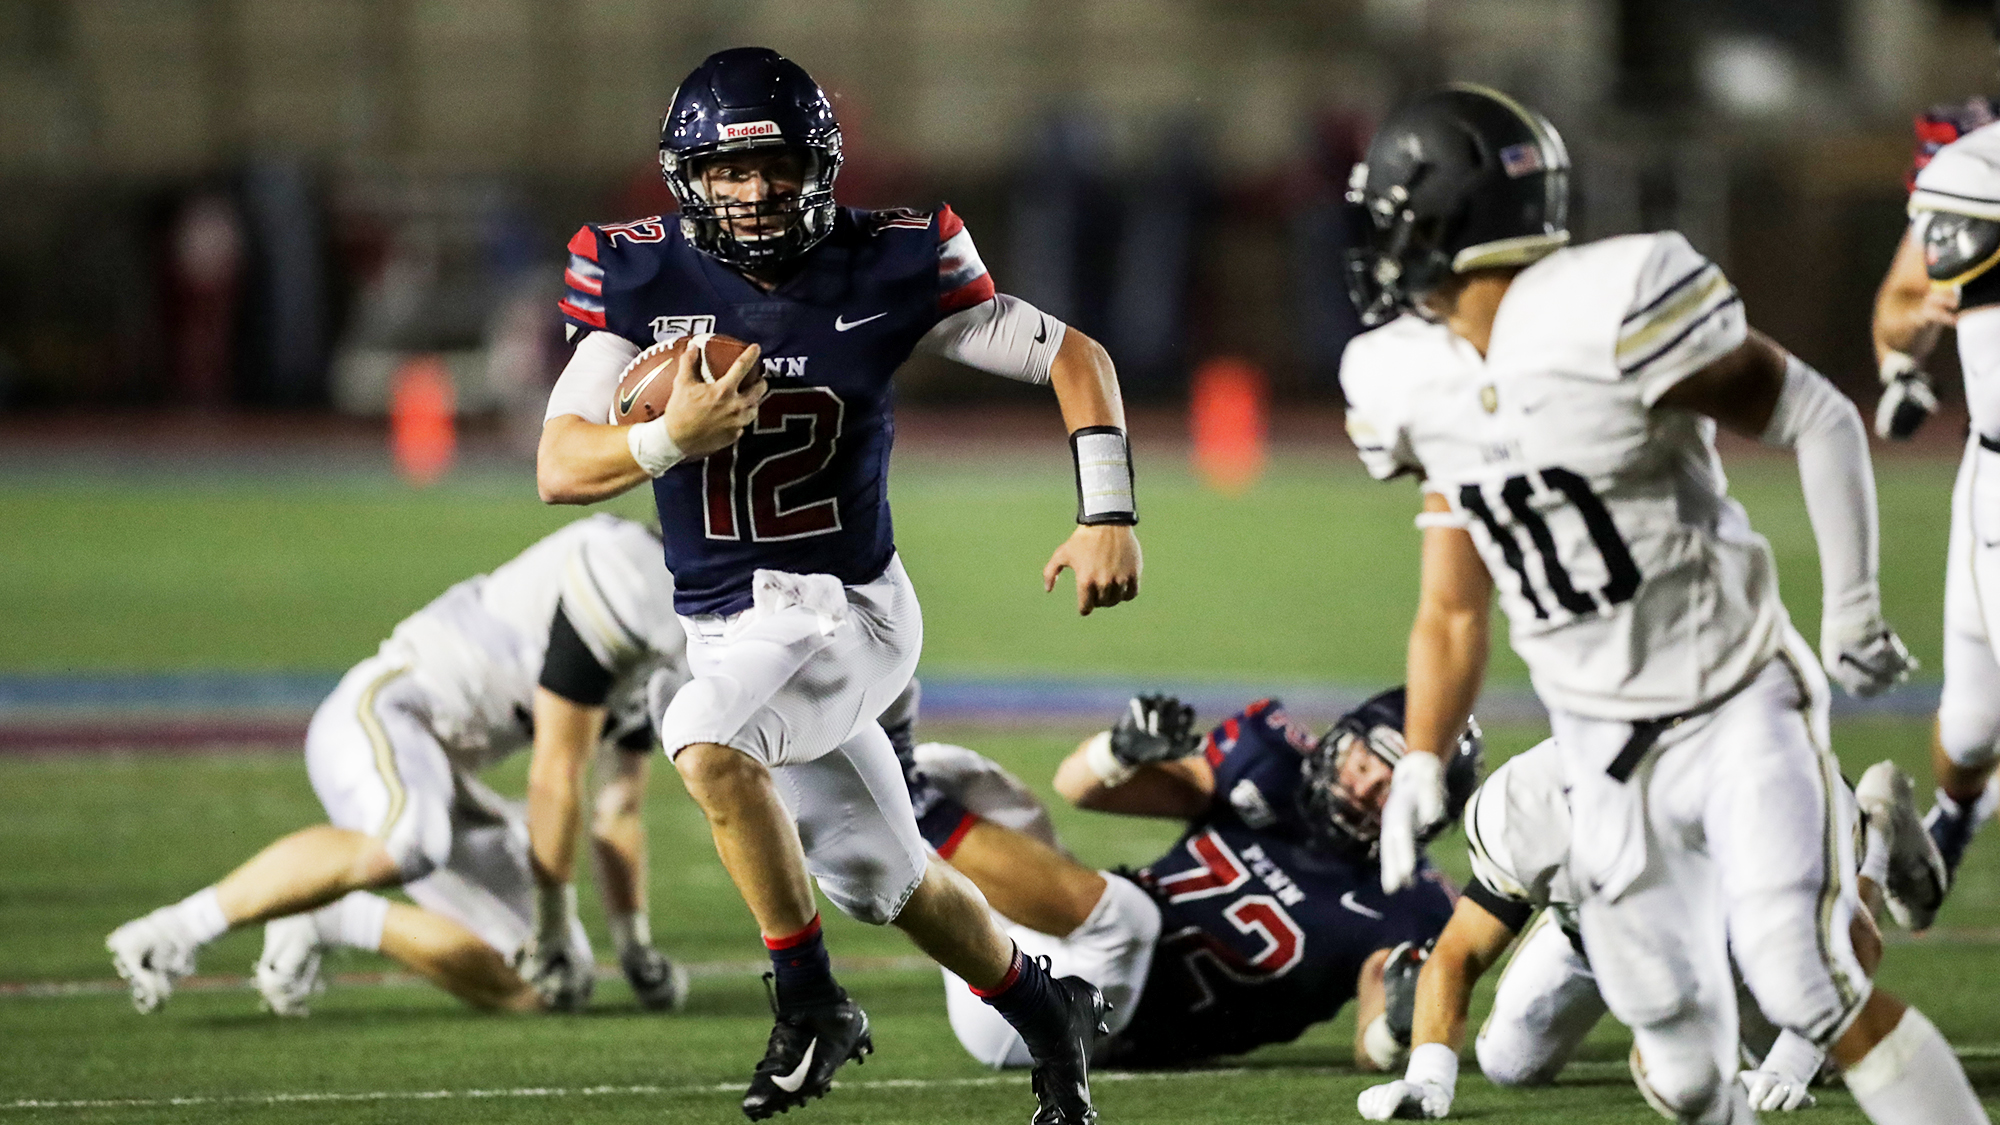 Quarterback Eddie Jenkins runs with the ball against Army at Franklin Field.